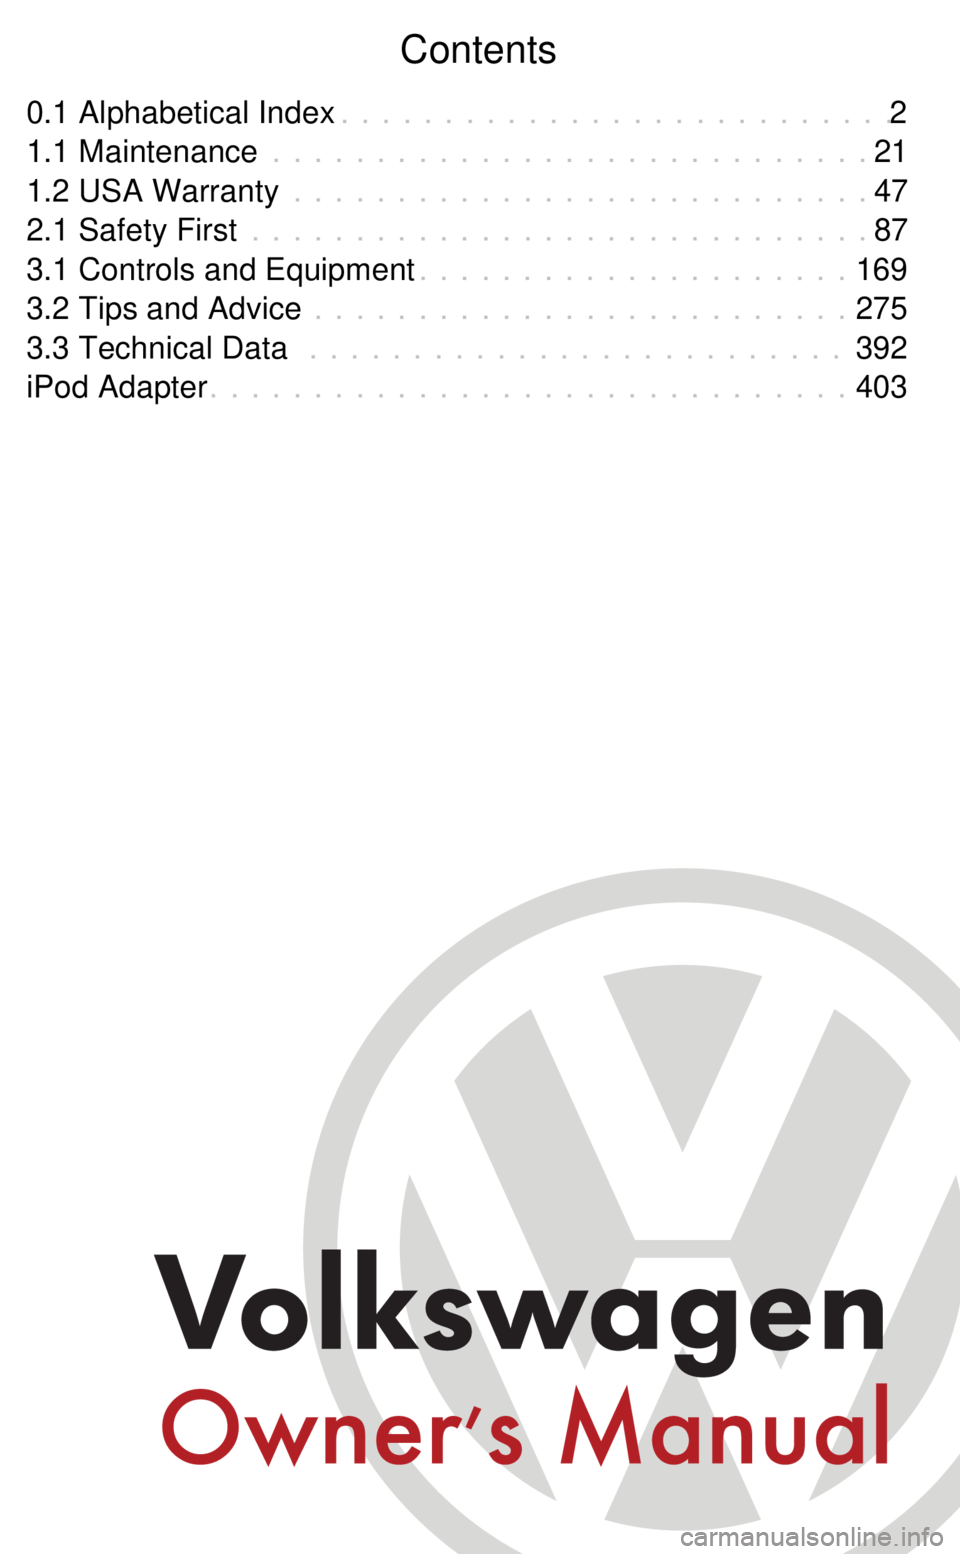 VOLKSWAGEN GOLF 2004  Owners Manual Contents
0.1 Alphabetical Index 2
. . . . . . . . . . . . . . . . . . . . . . . . . . .
1.1 Maintenance 21
. . . . . . . . . . . . . . . . . . . . . . . . . . . . .
1.2 USA Warranty 47
. . . . . . . .